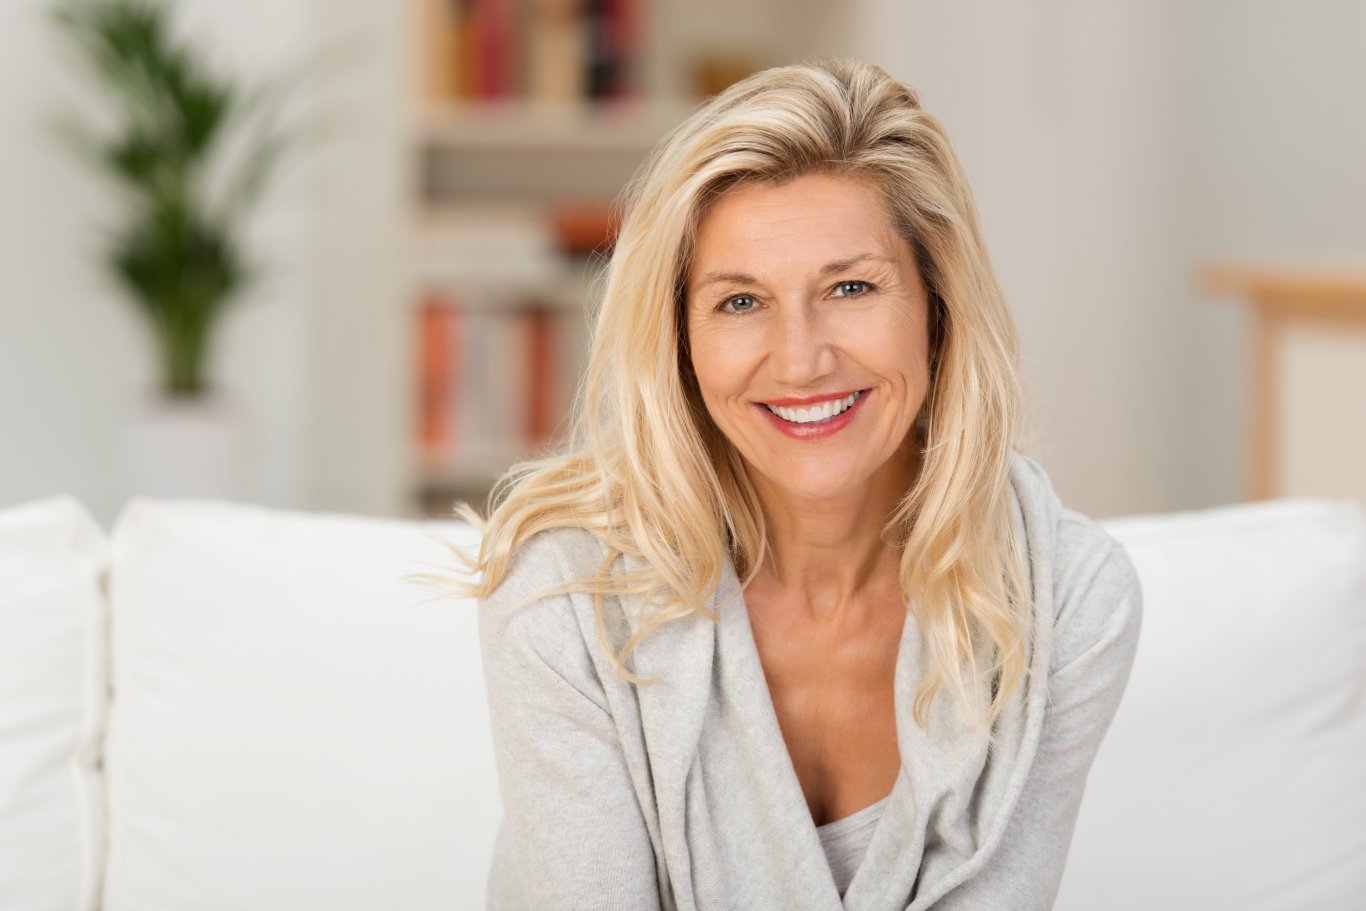 Facelift results can last for several years, but are not permanent. Our Denver plastic surgeon offers spa services that can help extend your facelift results. Call 303-470-3400 to learn more